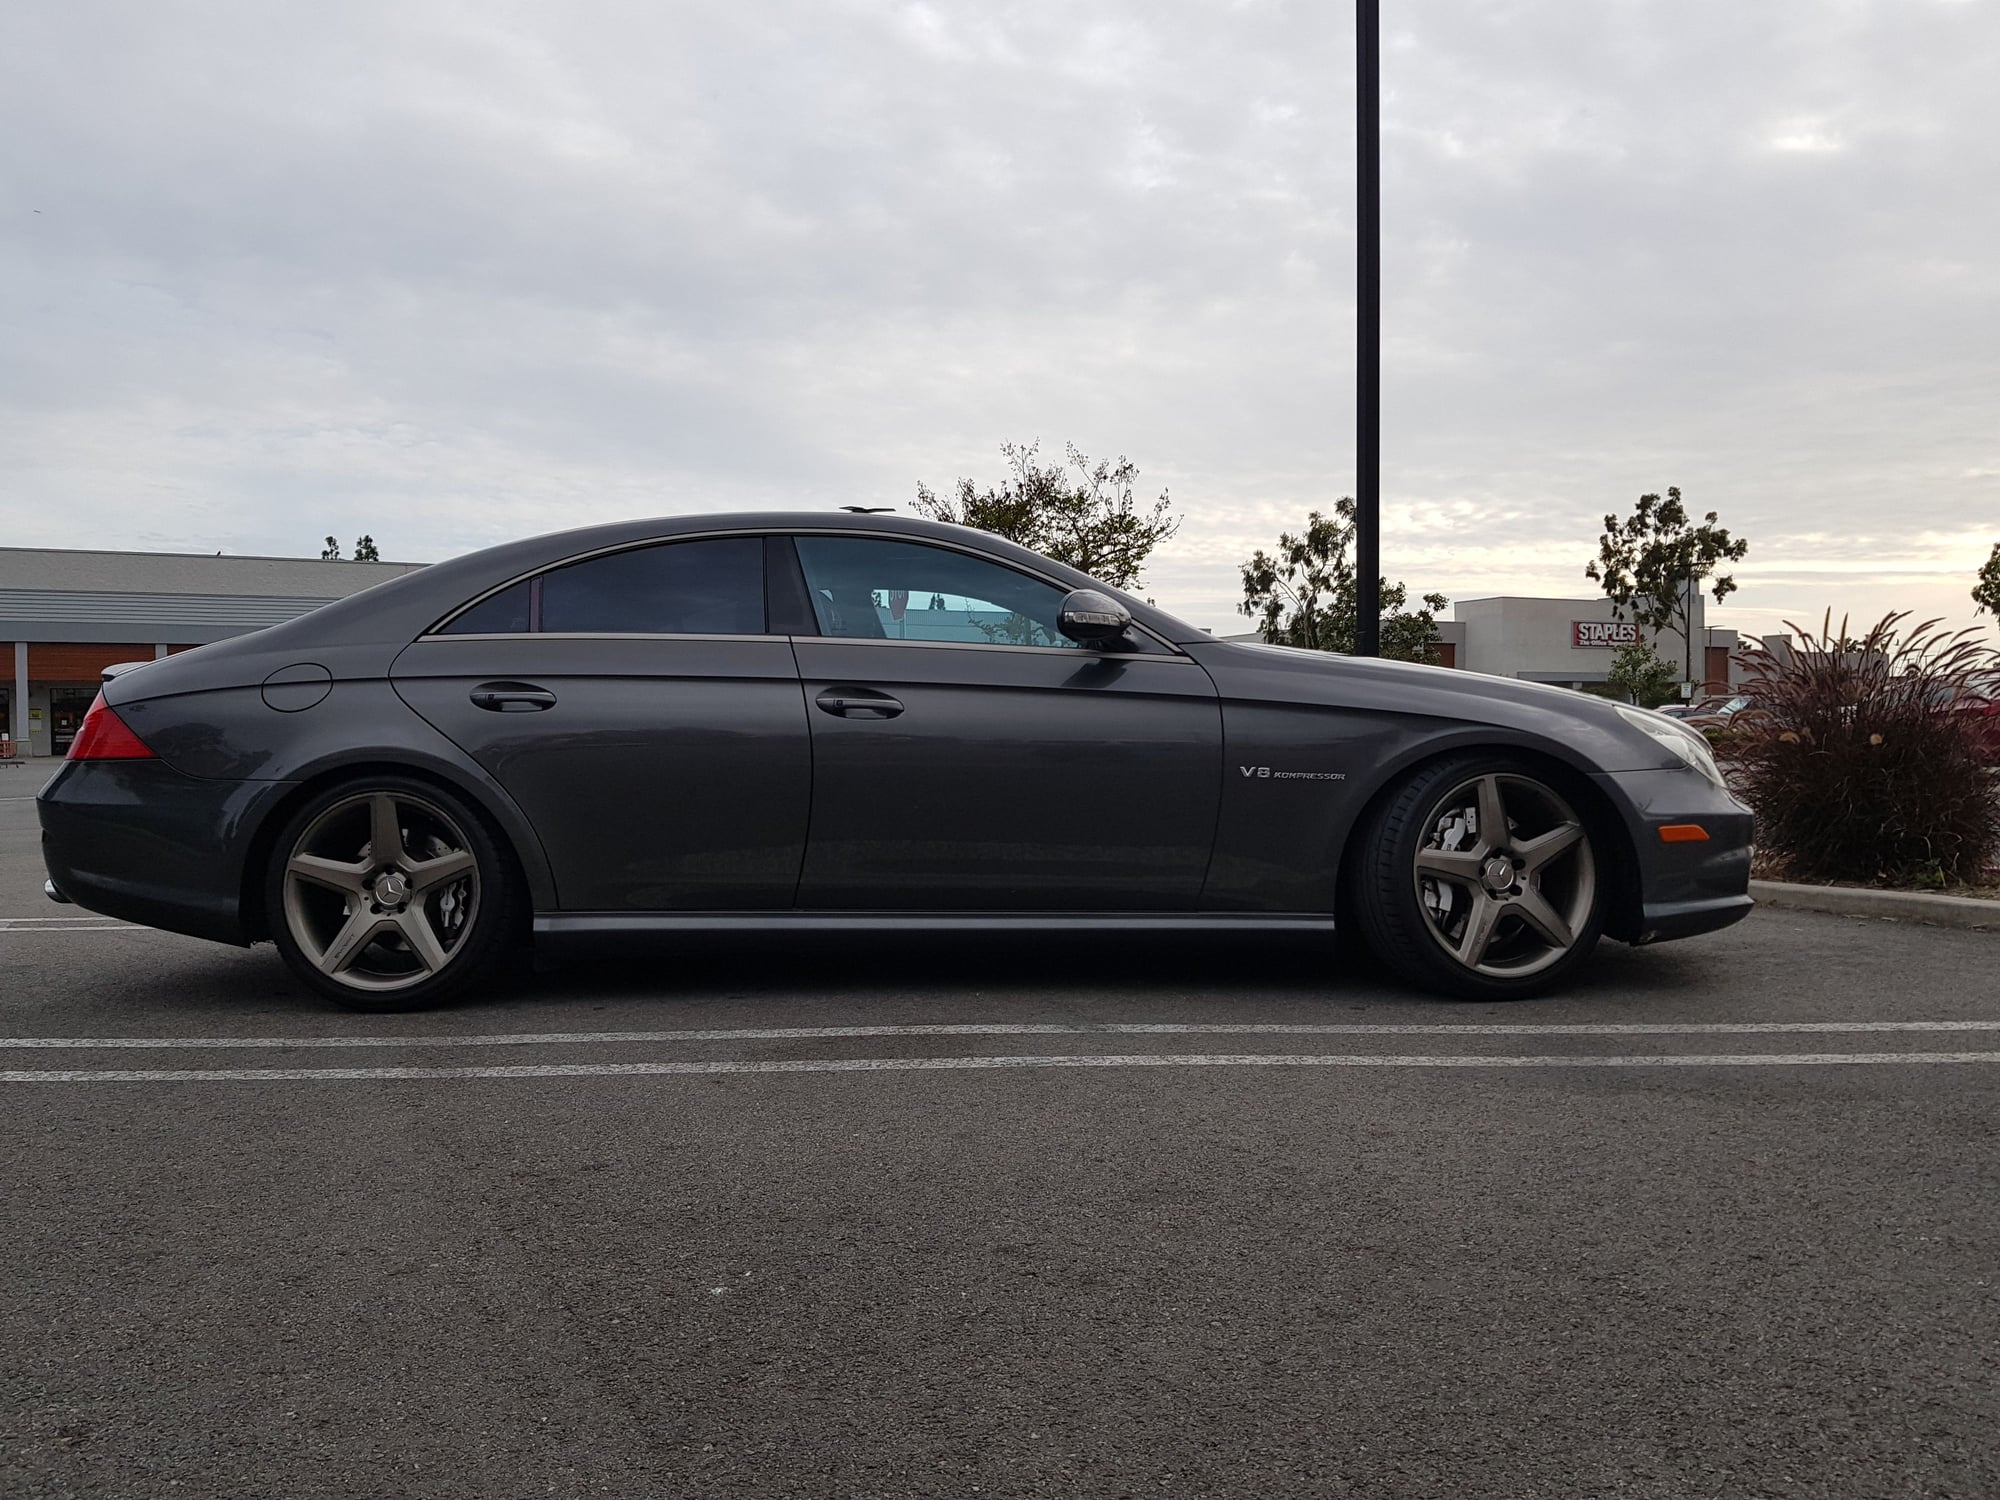 2006 Mercedes-Benz CLS55 AMG - IWC INGENIEUR CLS 55 AMG 1 OF 55 MADE W219 2006 - Used - VIN WDDDJ76X66A059266 - 119 Miles - Other - Cerritos, CA 90814, United States